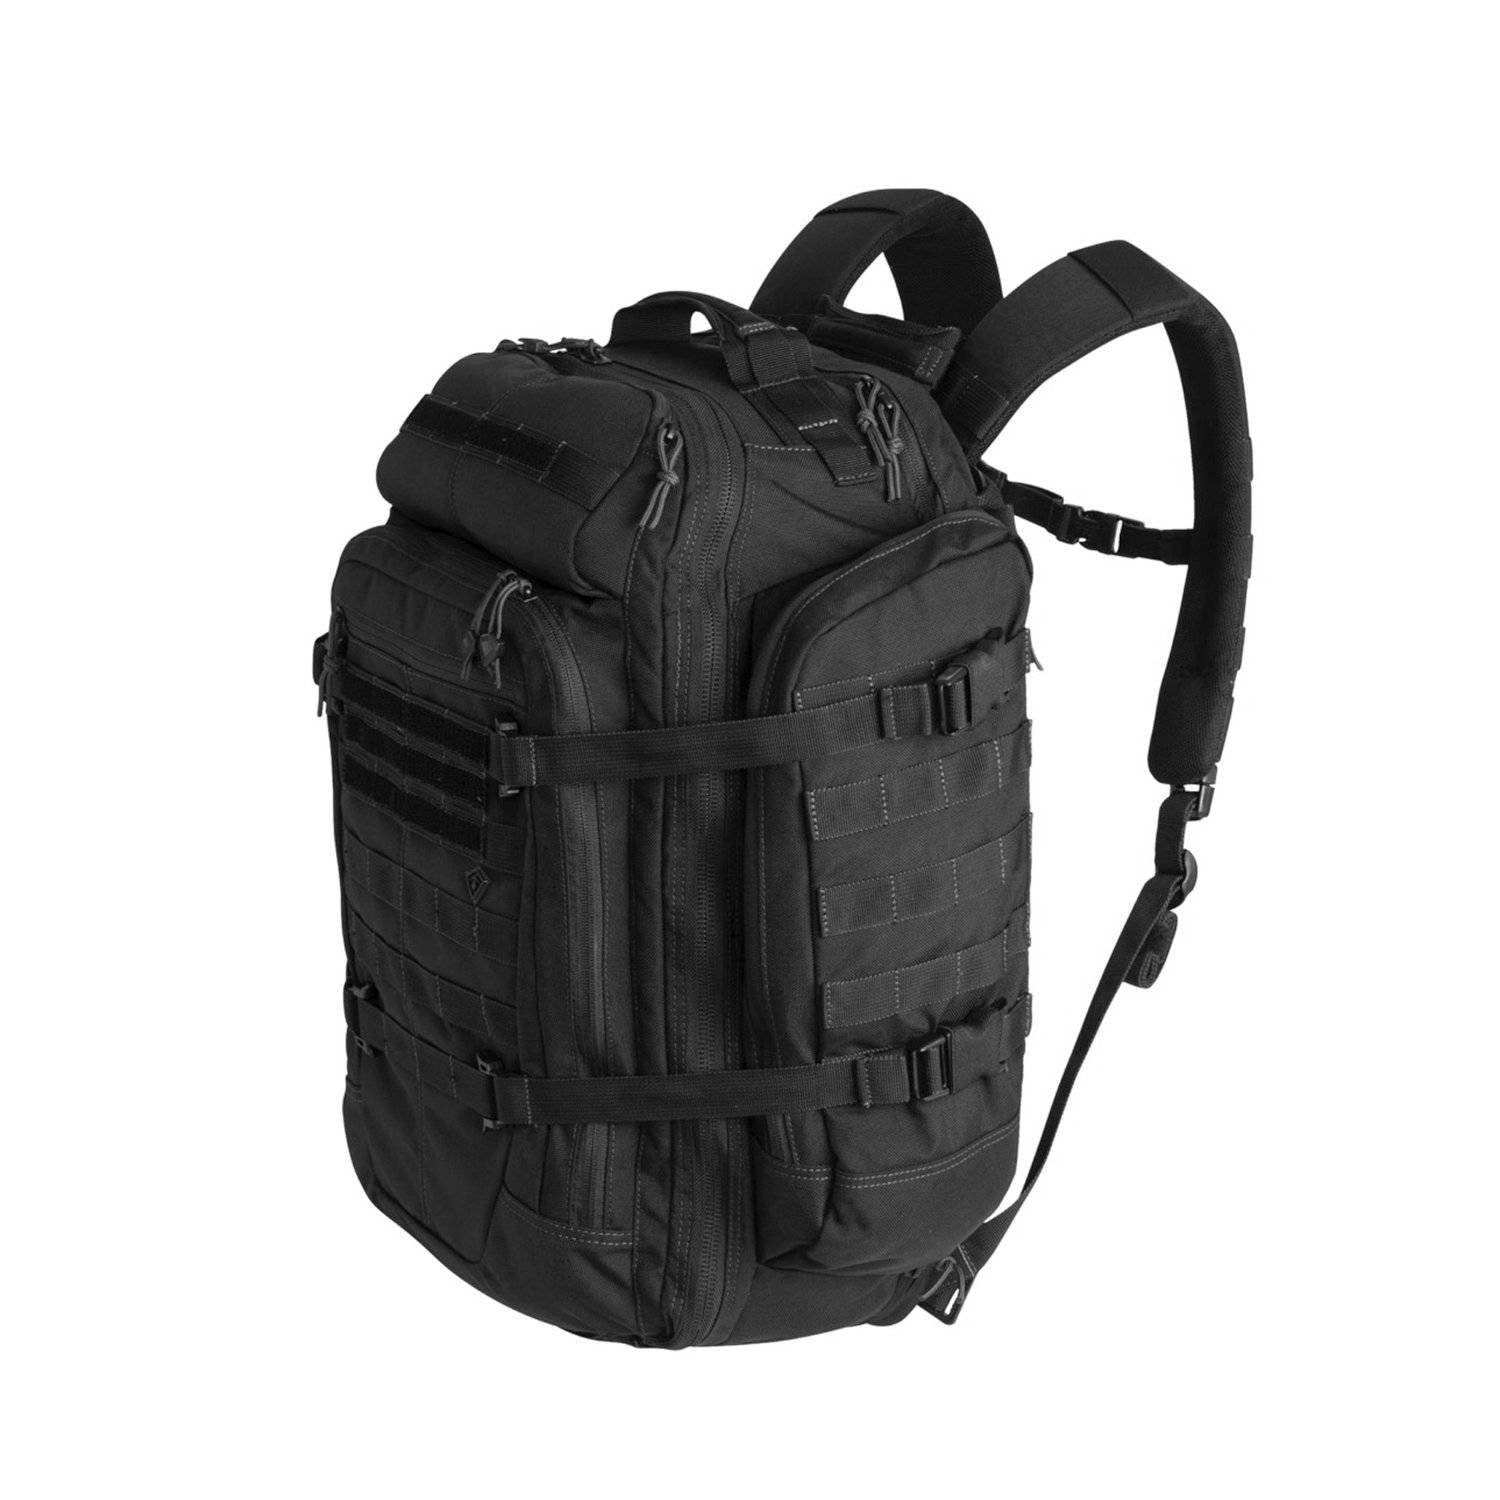 FIRST TACTICAL SPECIALIST 3-DAY BACKPACK - 56L